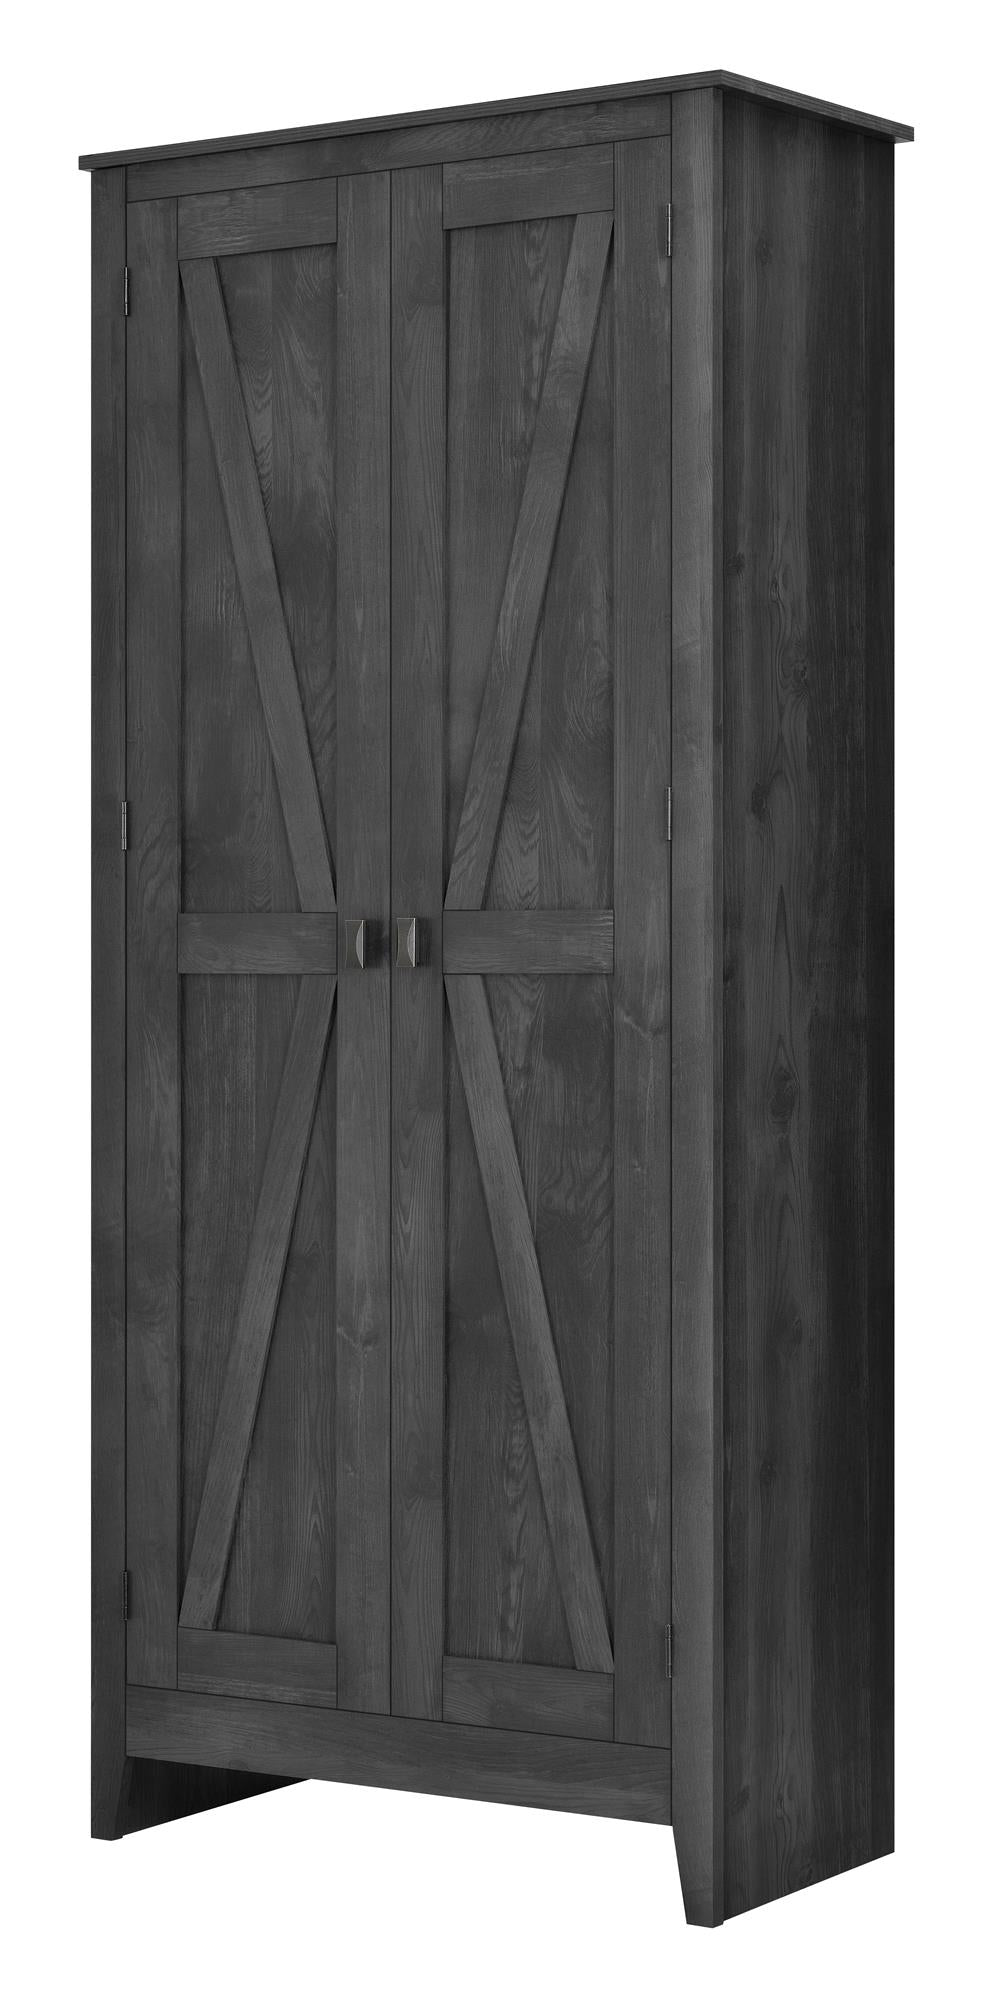 31.5 inch wide storage cabinet for any room -  Rustic Gray